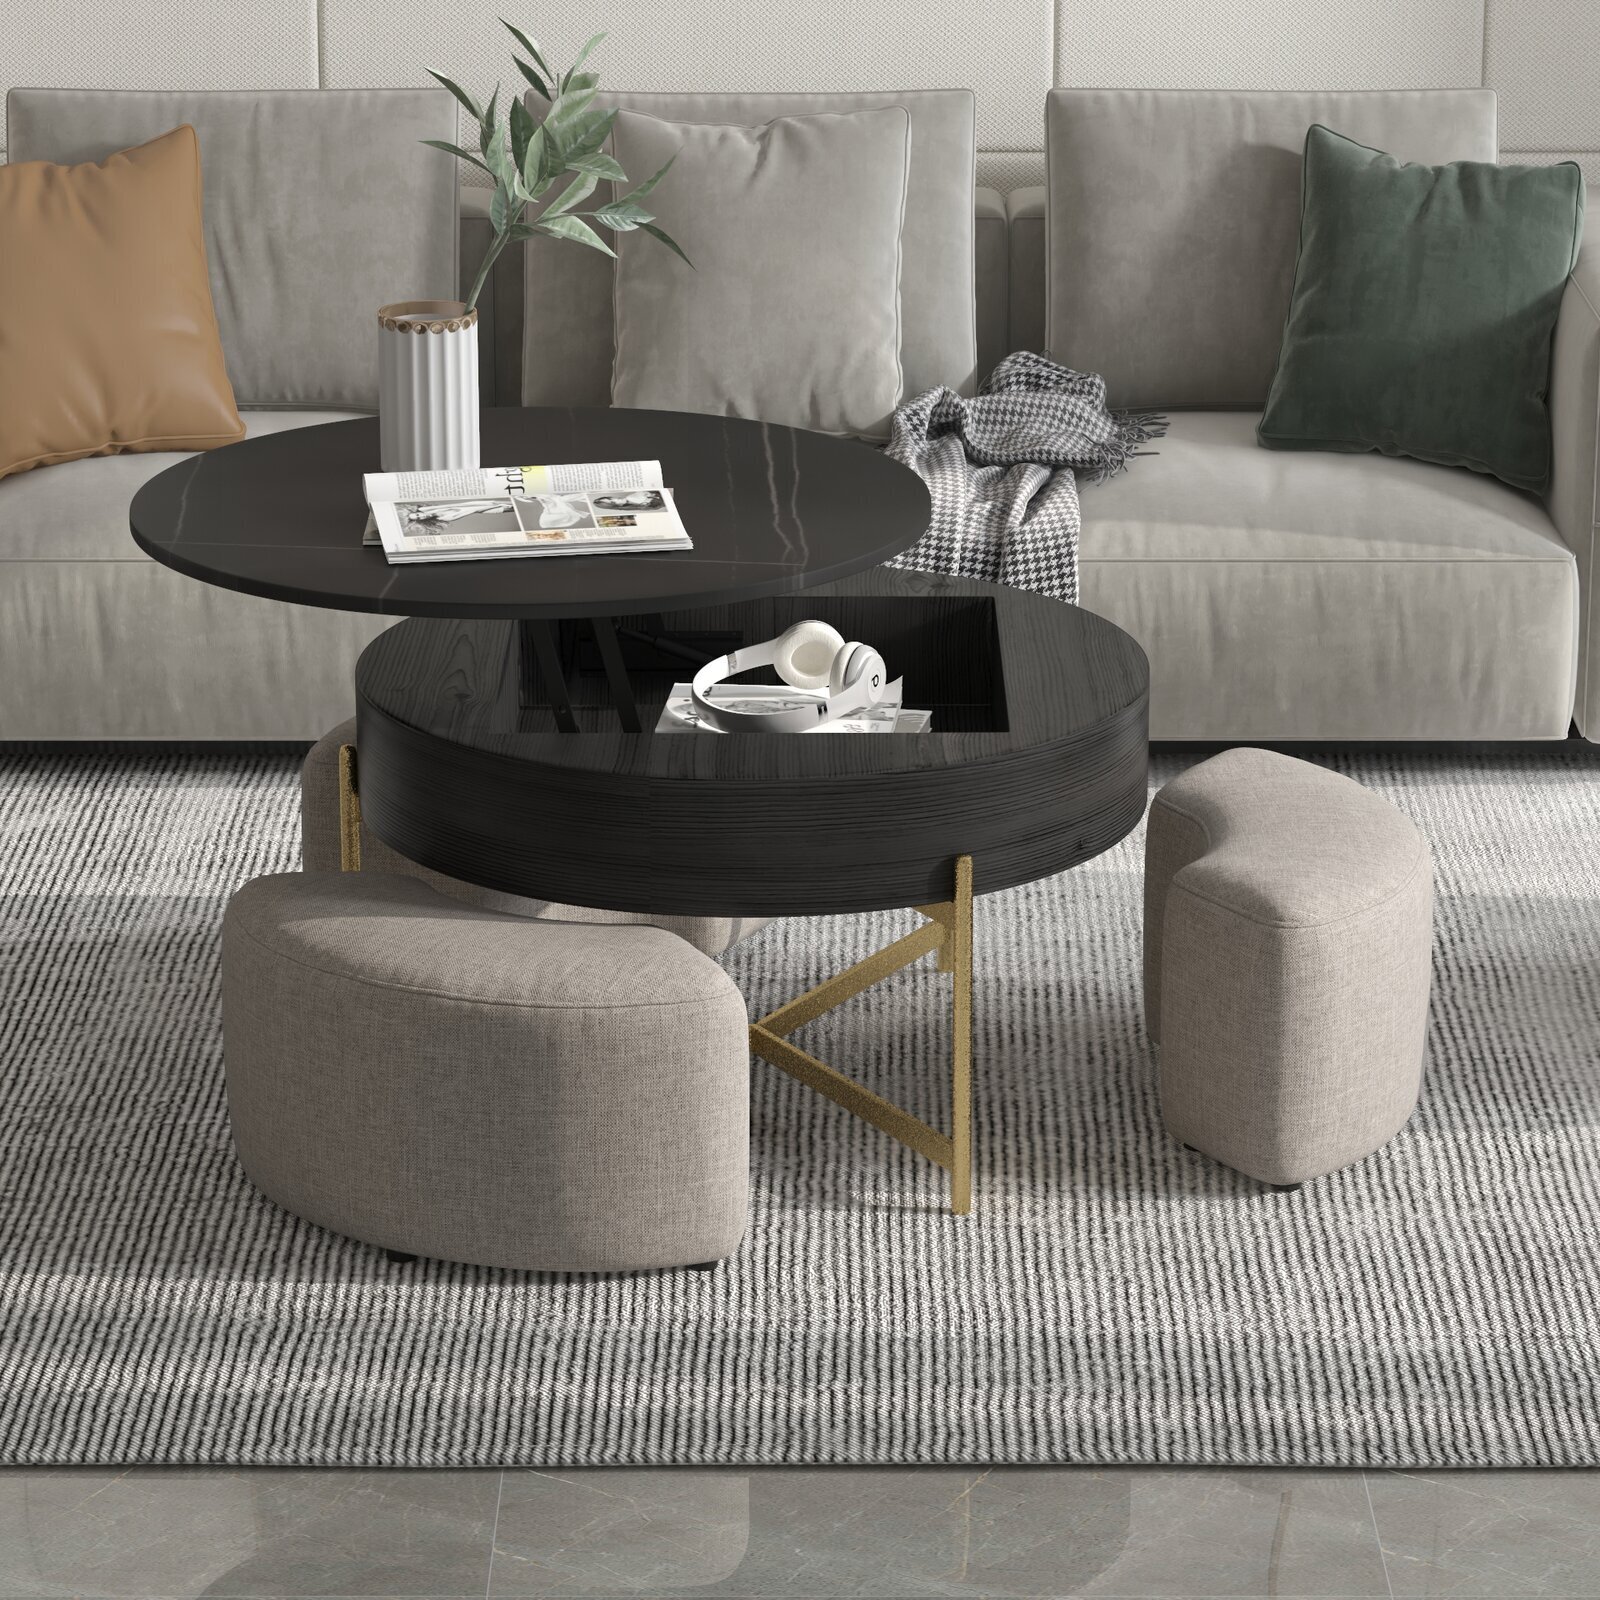 Black Lift Coffee Table With Beige Stools 